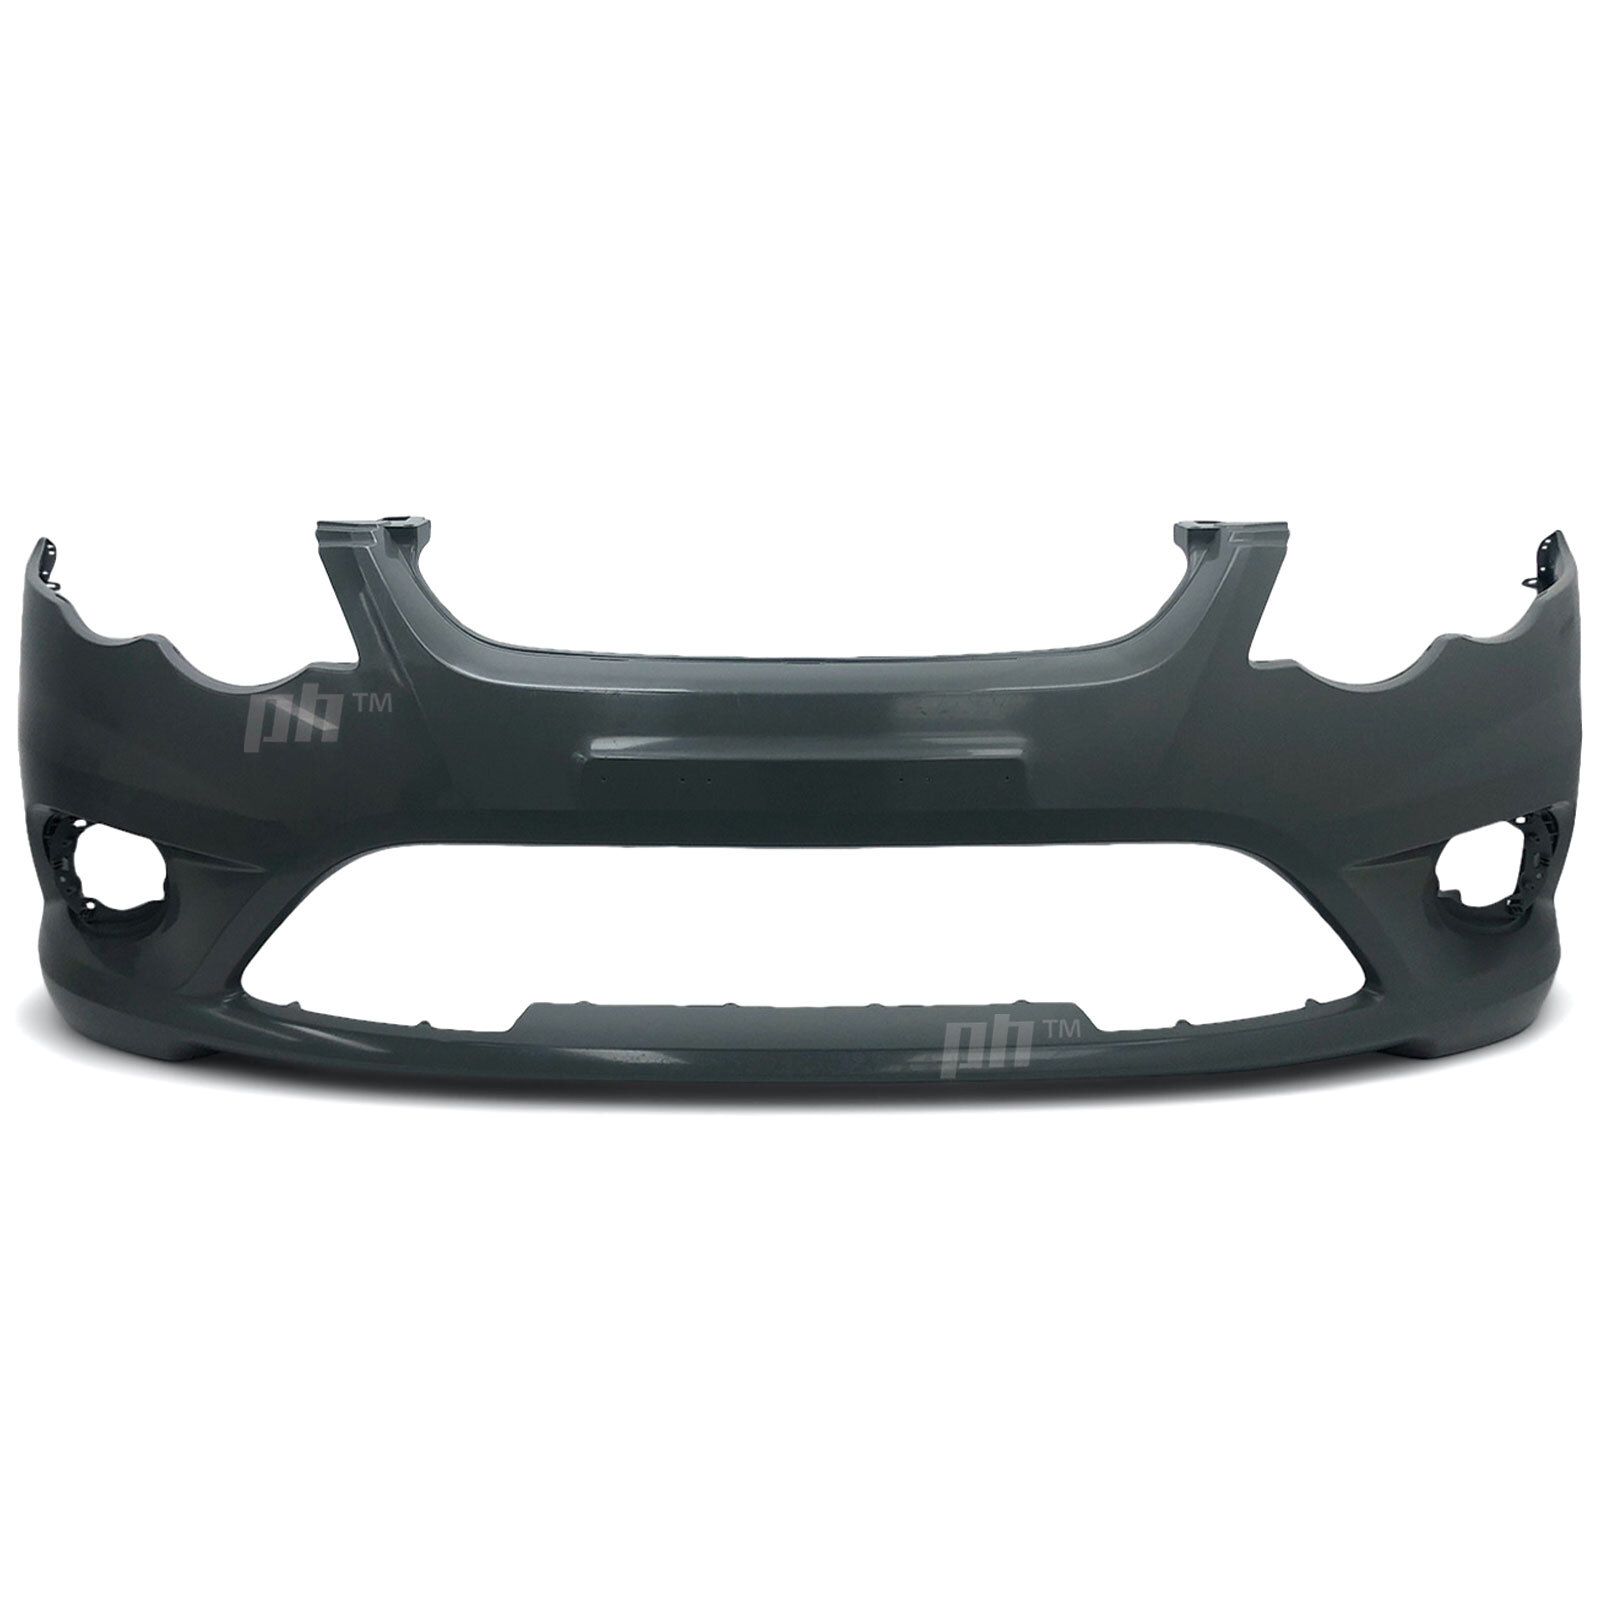 Front Bumper Bar fits Ford Falcon FG XR6 XR8 Series 1 2008 - 2011 -  Aftermarket